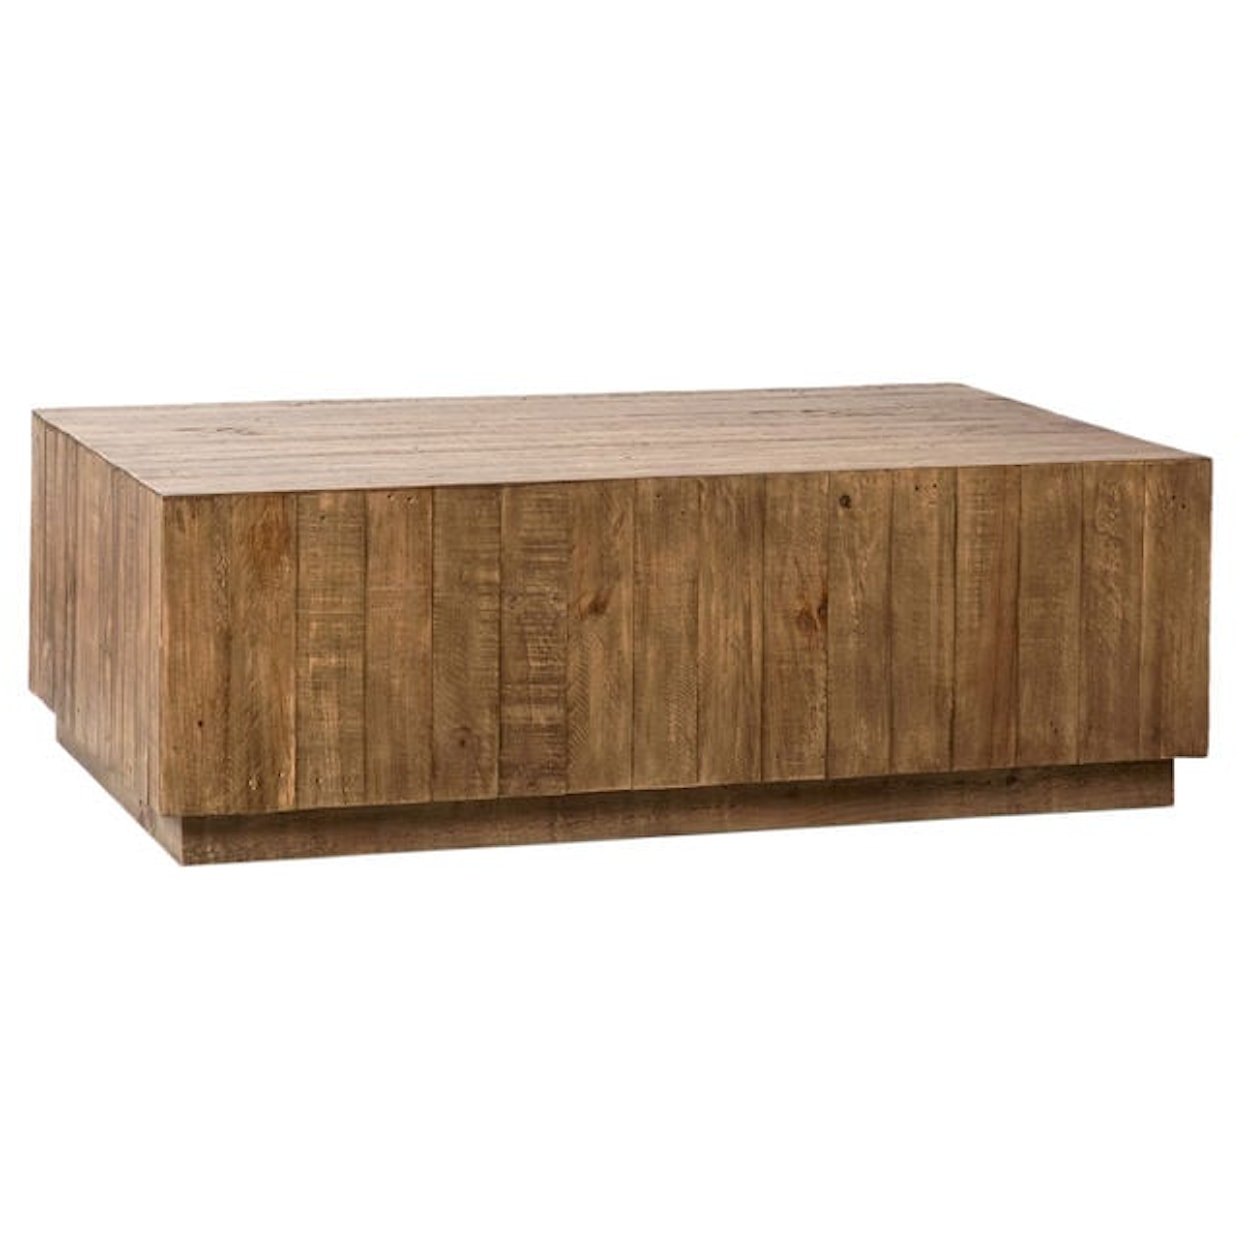 Dovetail Furniture Coffee Tables WELBECK COFFEE TABLE